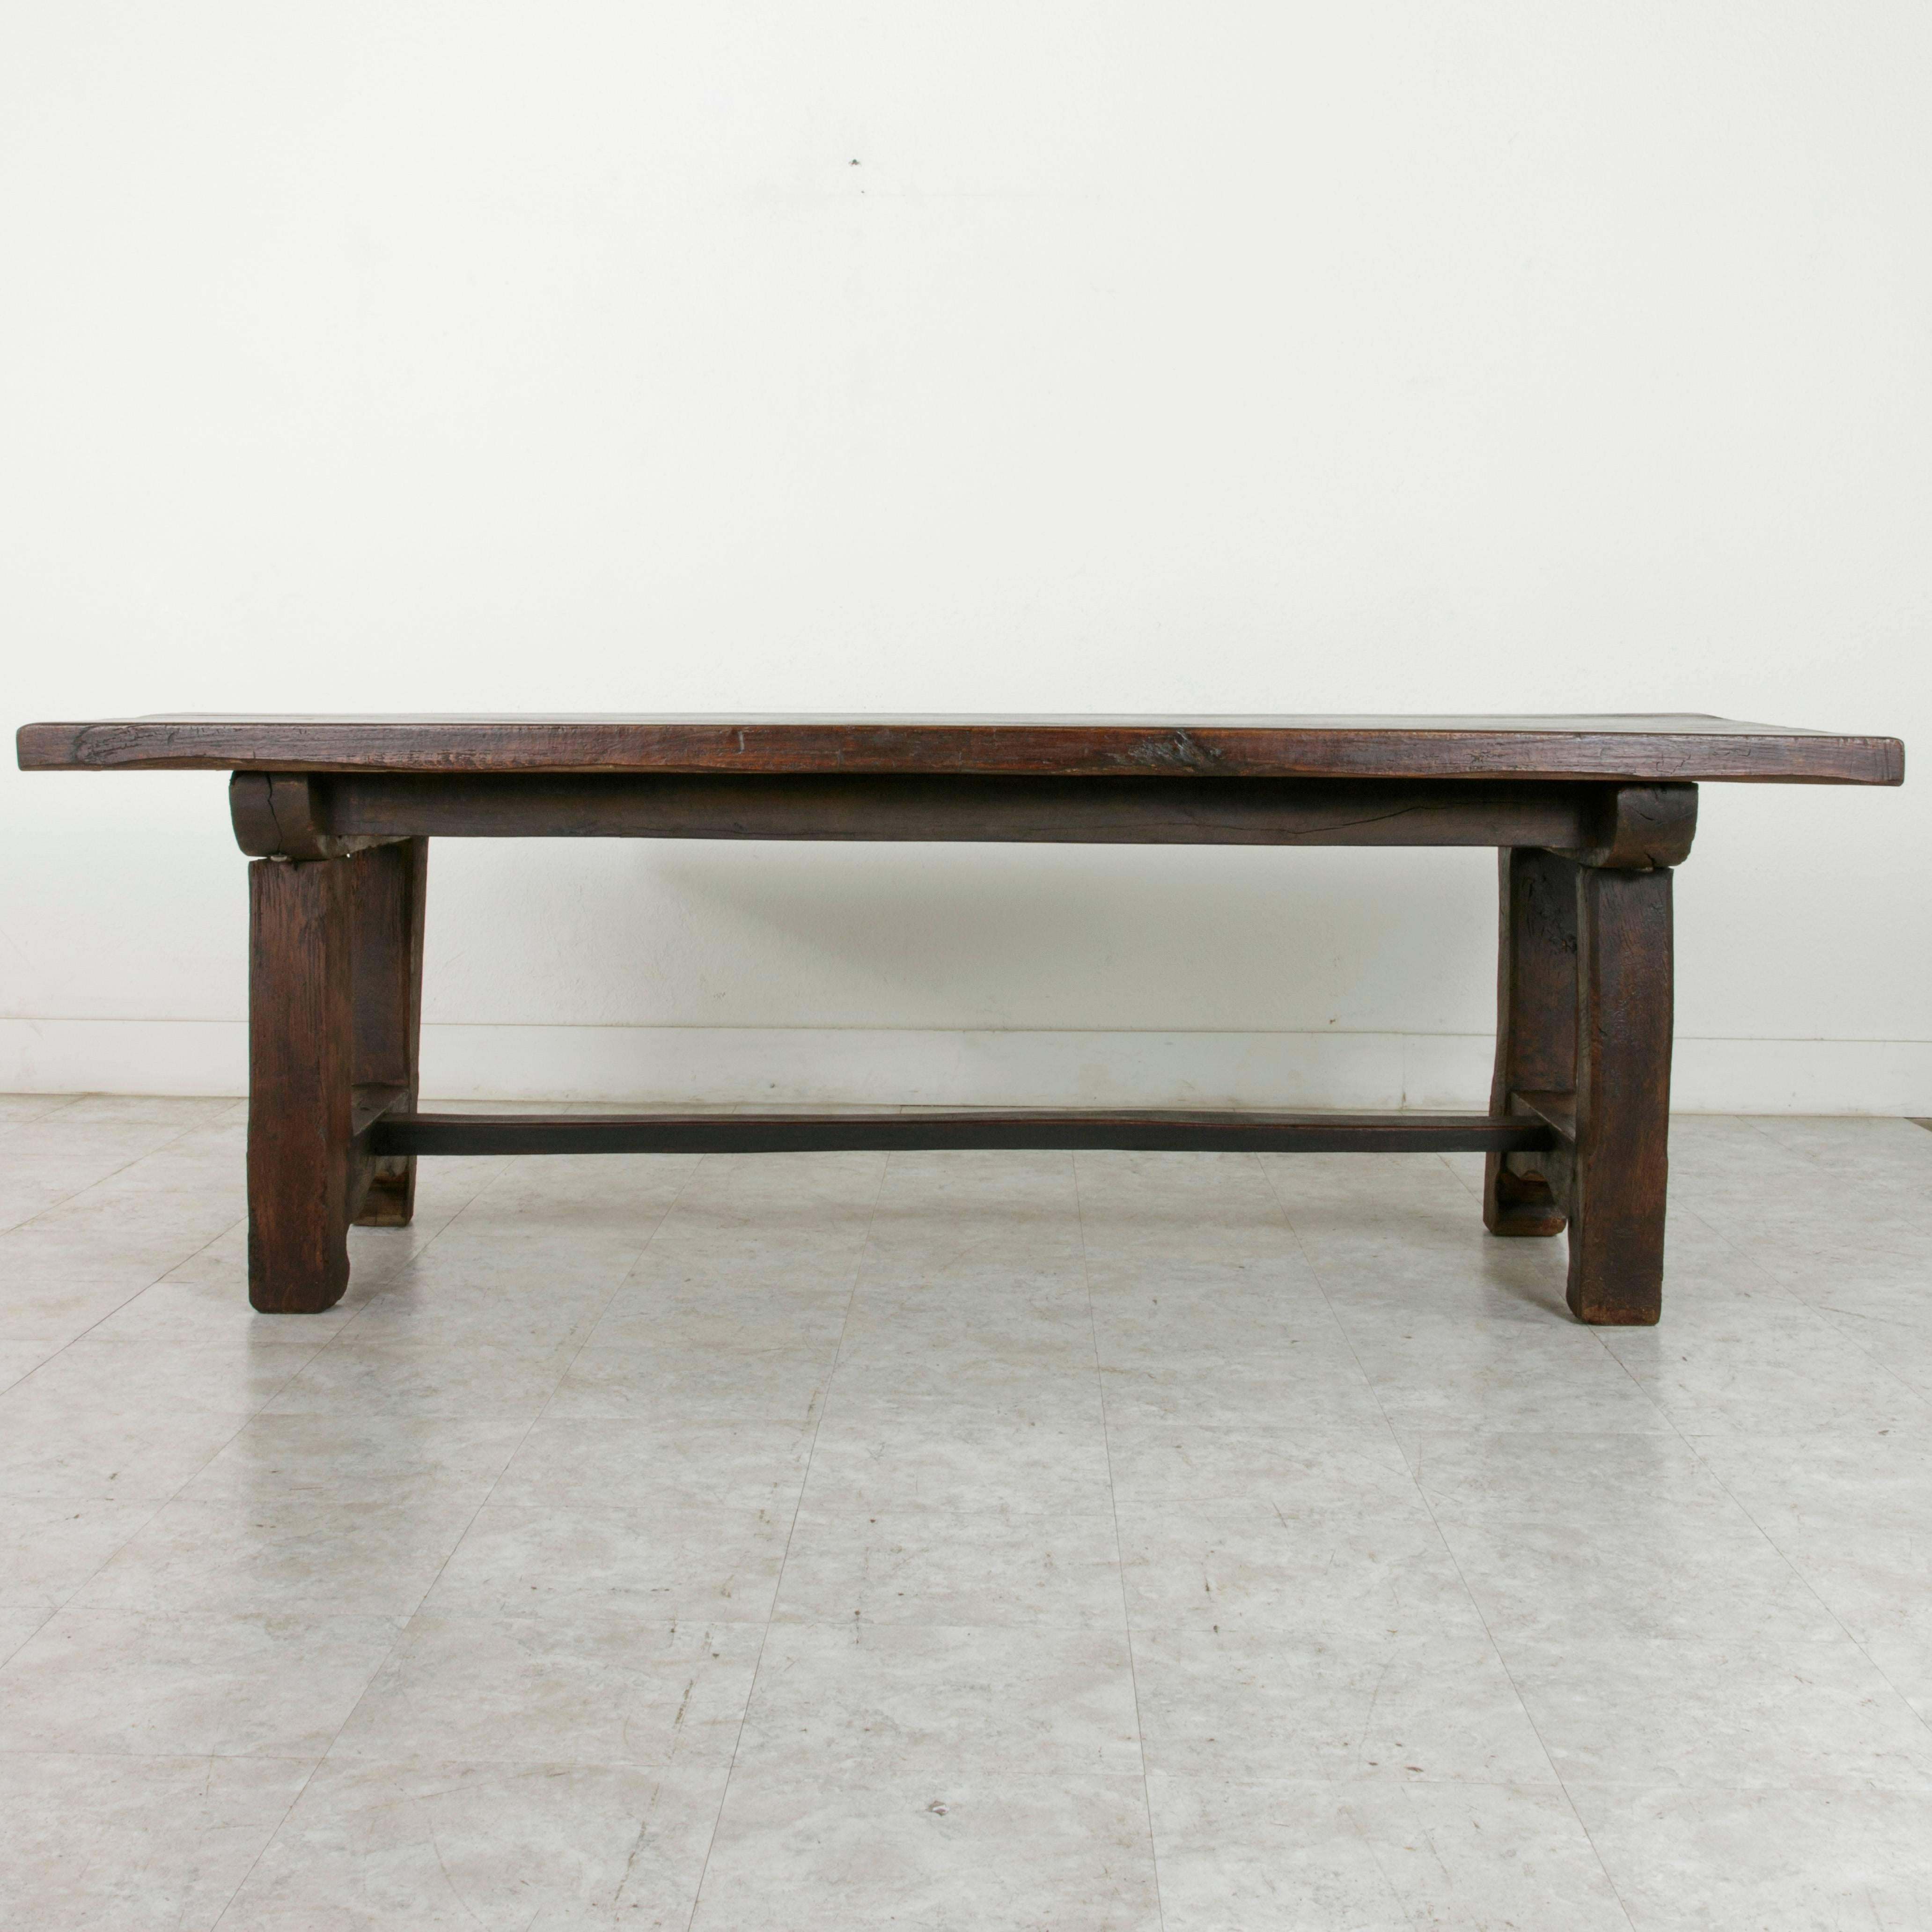 19th Century French Artisan-Made Oak Farm Table Dining Table Made from 18th Century Beams